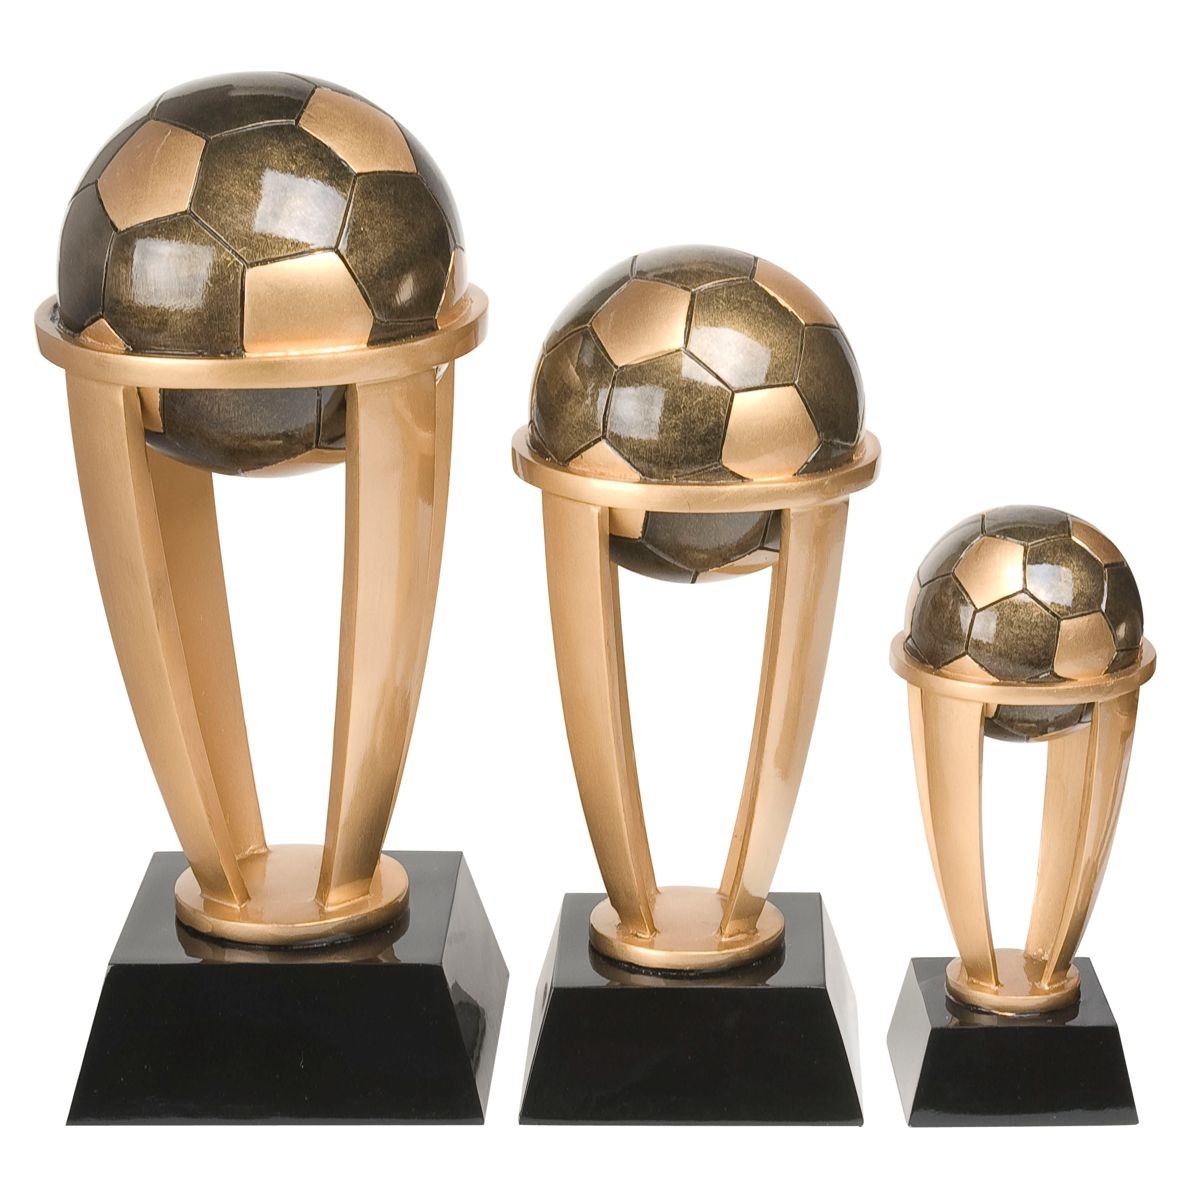 Soccer Resin Trophy 5" tall with  FREE custom engraved plate 